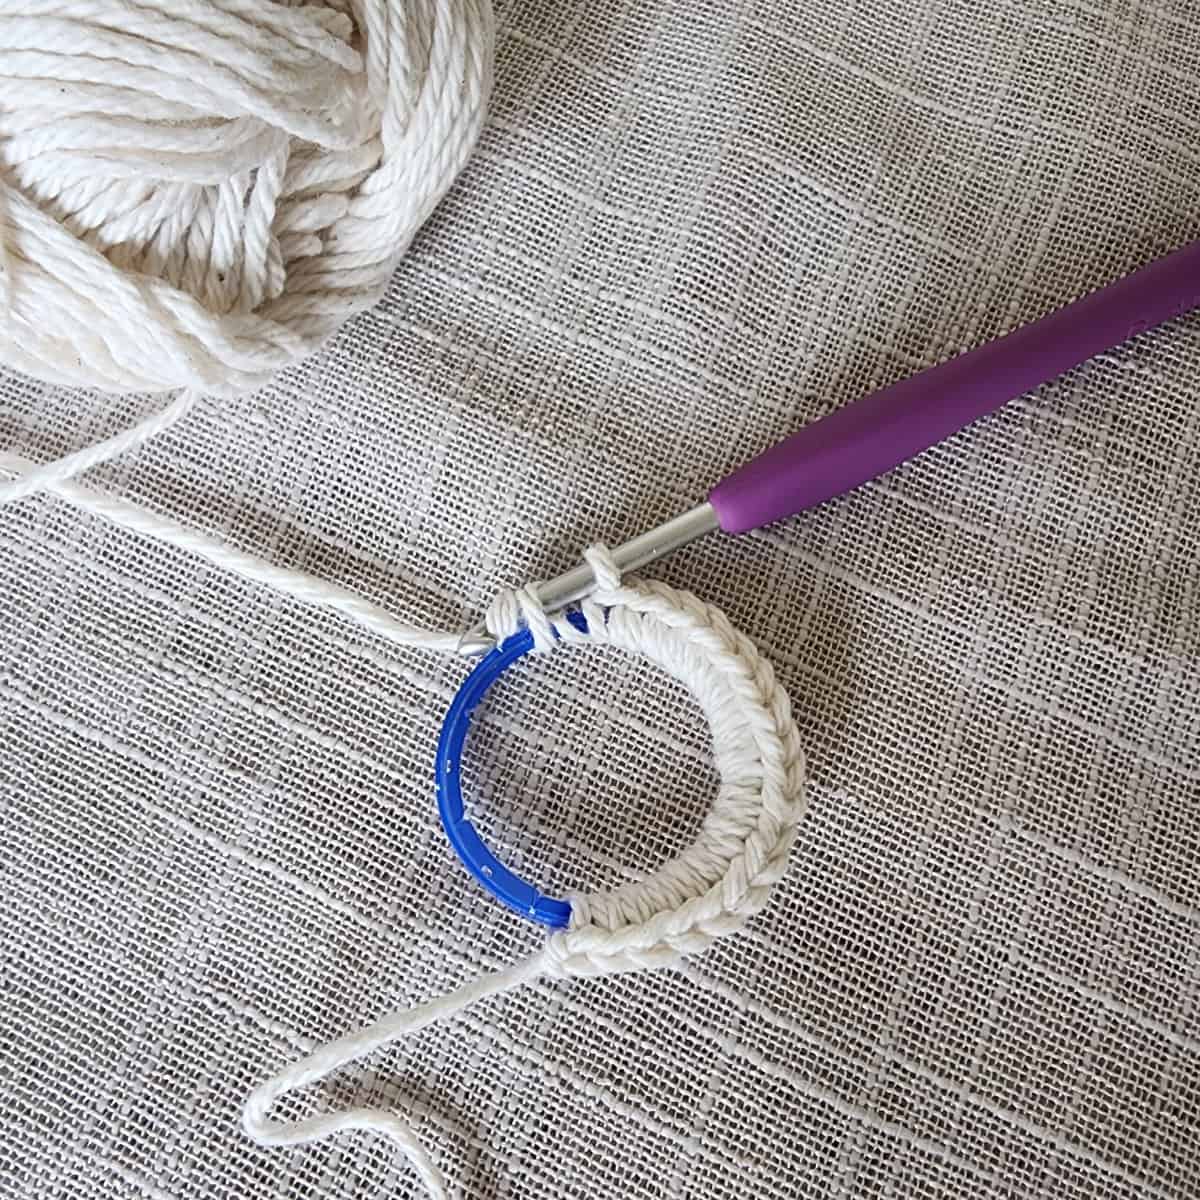 Blue milk jug ring being covered with ecru yarn to create a plant hanger ring.